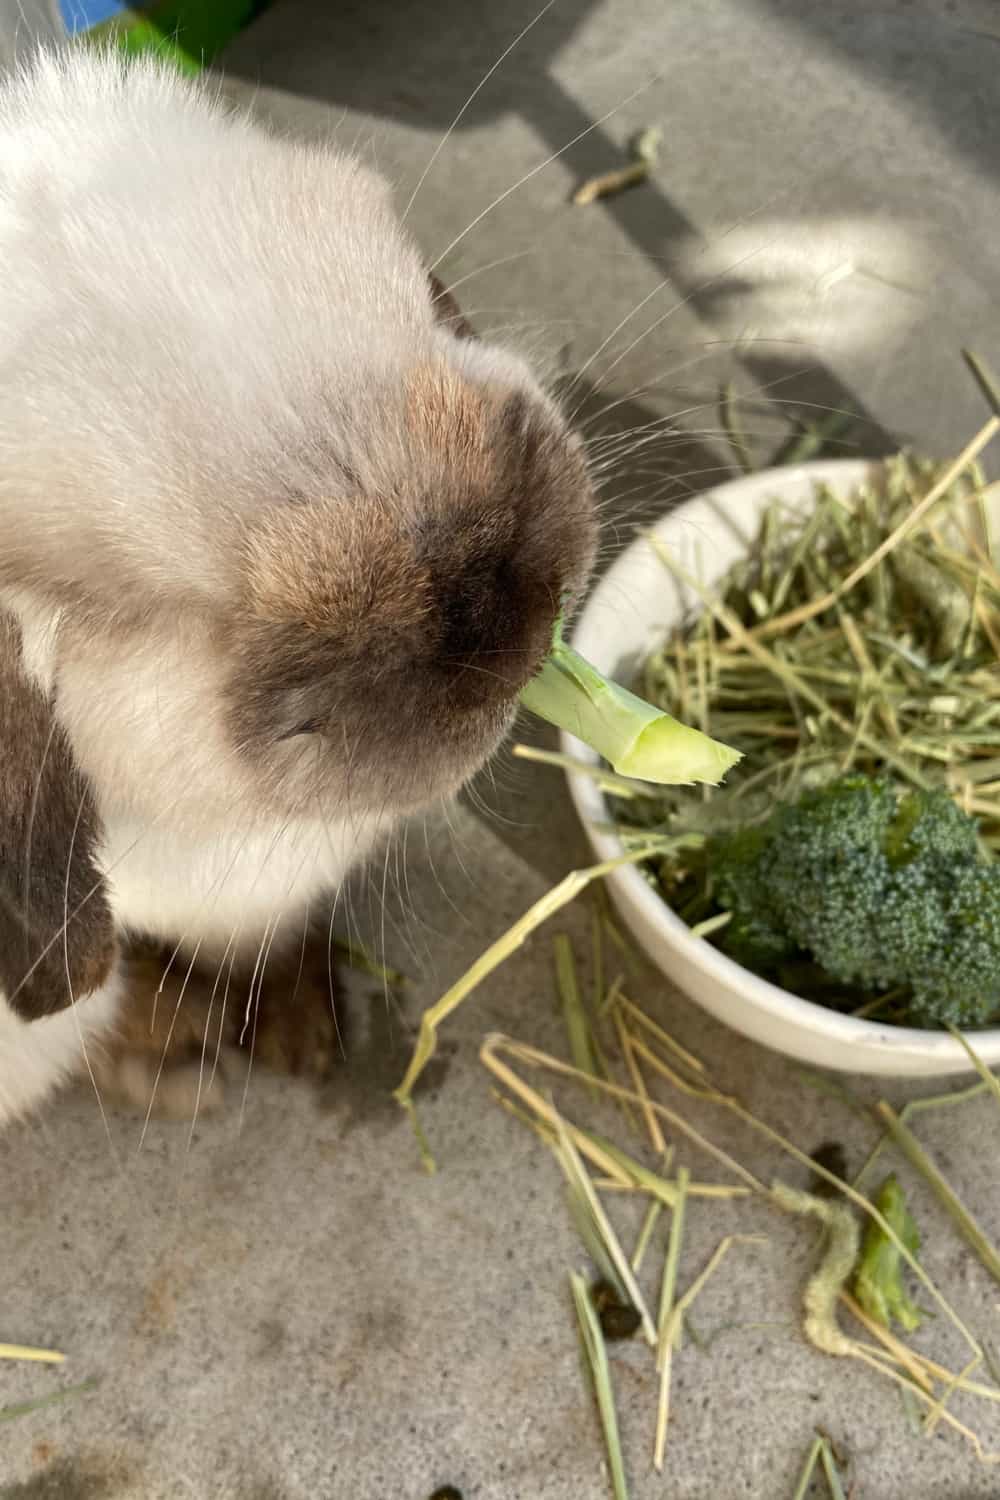 How Much Broccoli to Offer Your Bunny